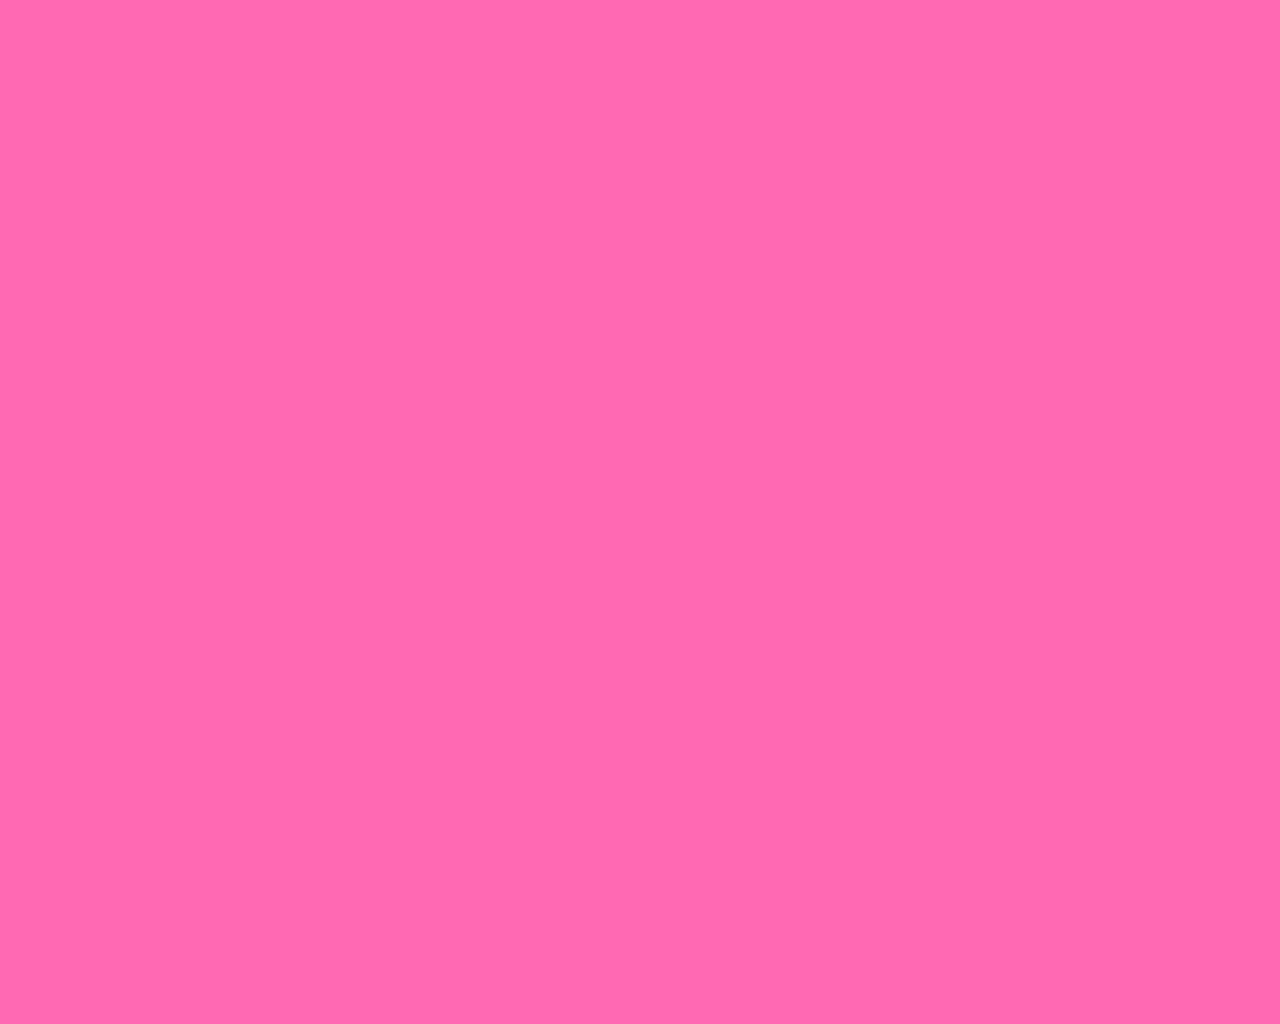 Hot Pink Solid Color Backgrounds Images Pictures   Becuo 1280x1024